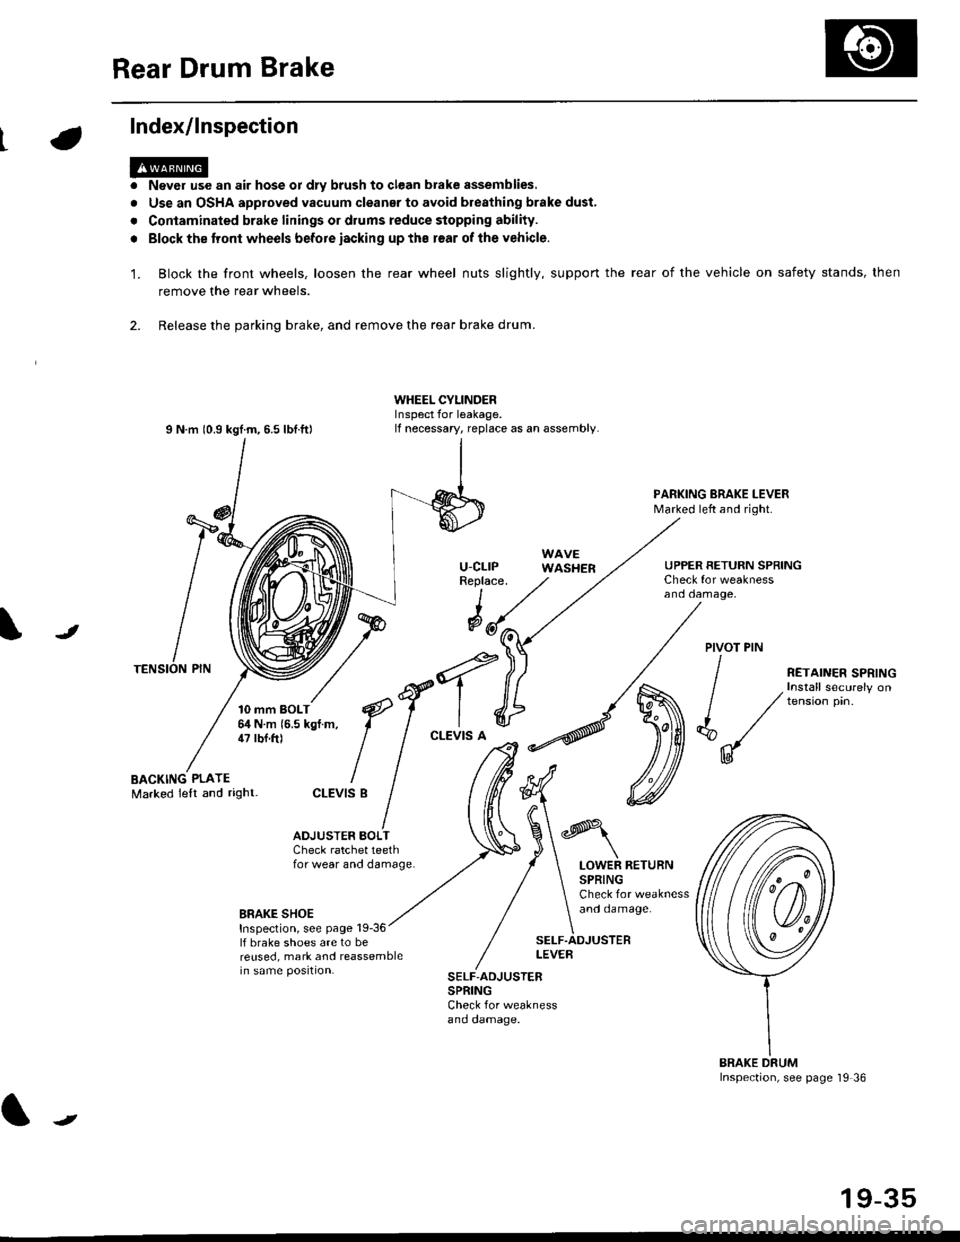 HONDA CIVIC 1996 6.G Owners Guide Rear Drum Brake
Index/lnspection
1.
a
a
Never use an air hose or dly brush to clean brake assemblies,
Use an OSHA approved vacuum cleanar to avoid breathing brake dust,
Contaminated brake linings or 